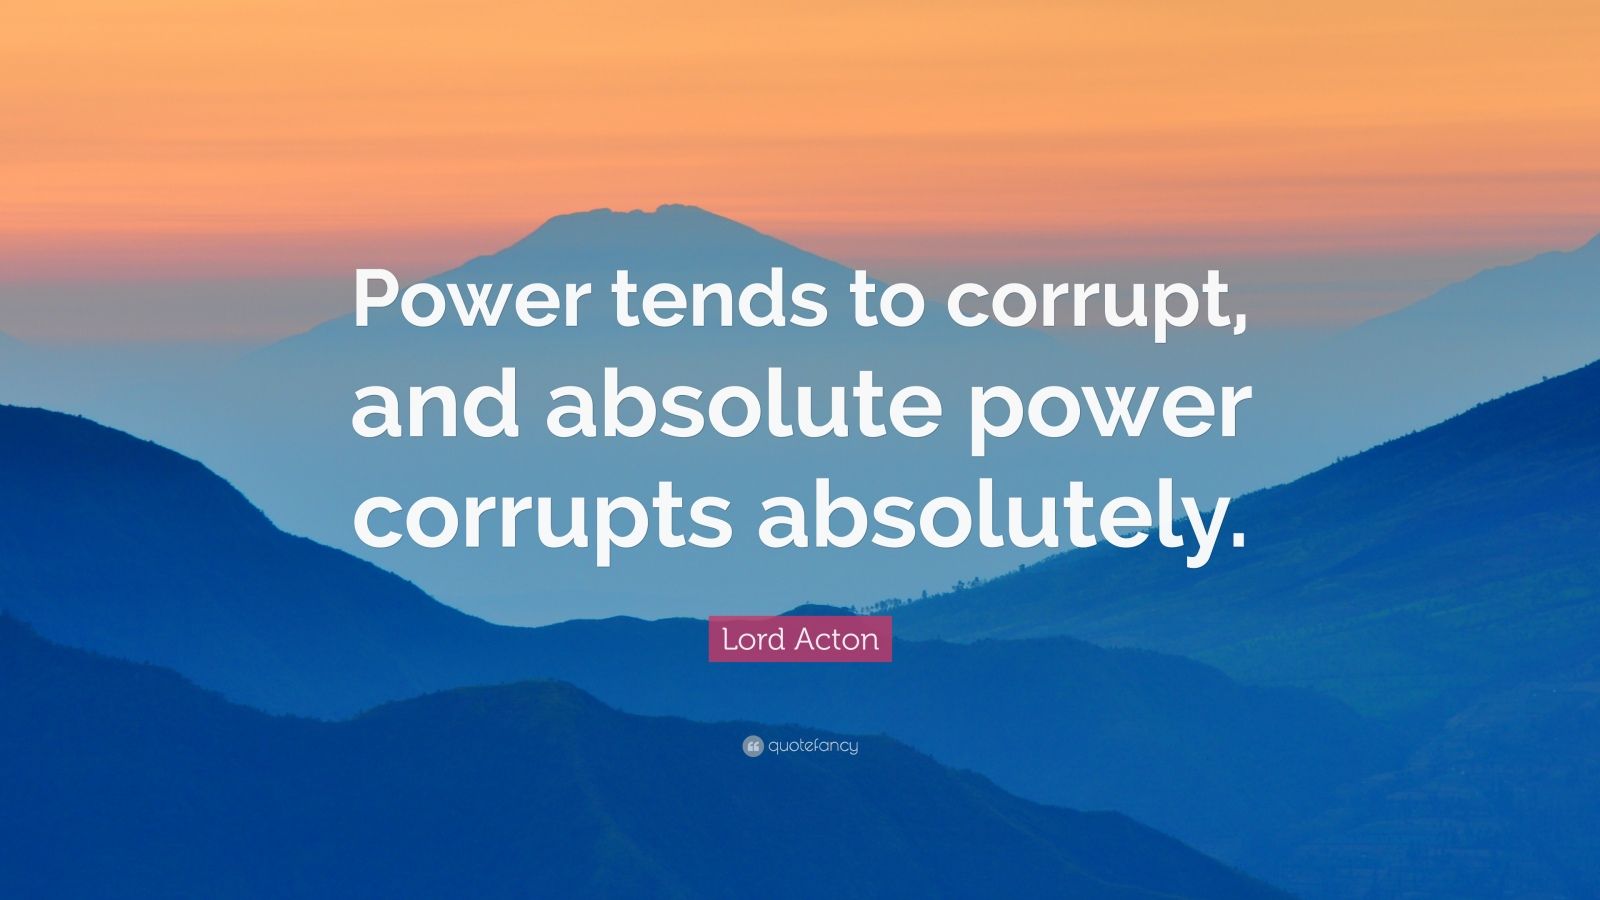 essay on power corrupts and absolute power corrupts absolutely